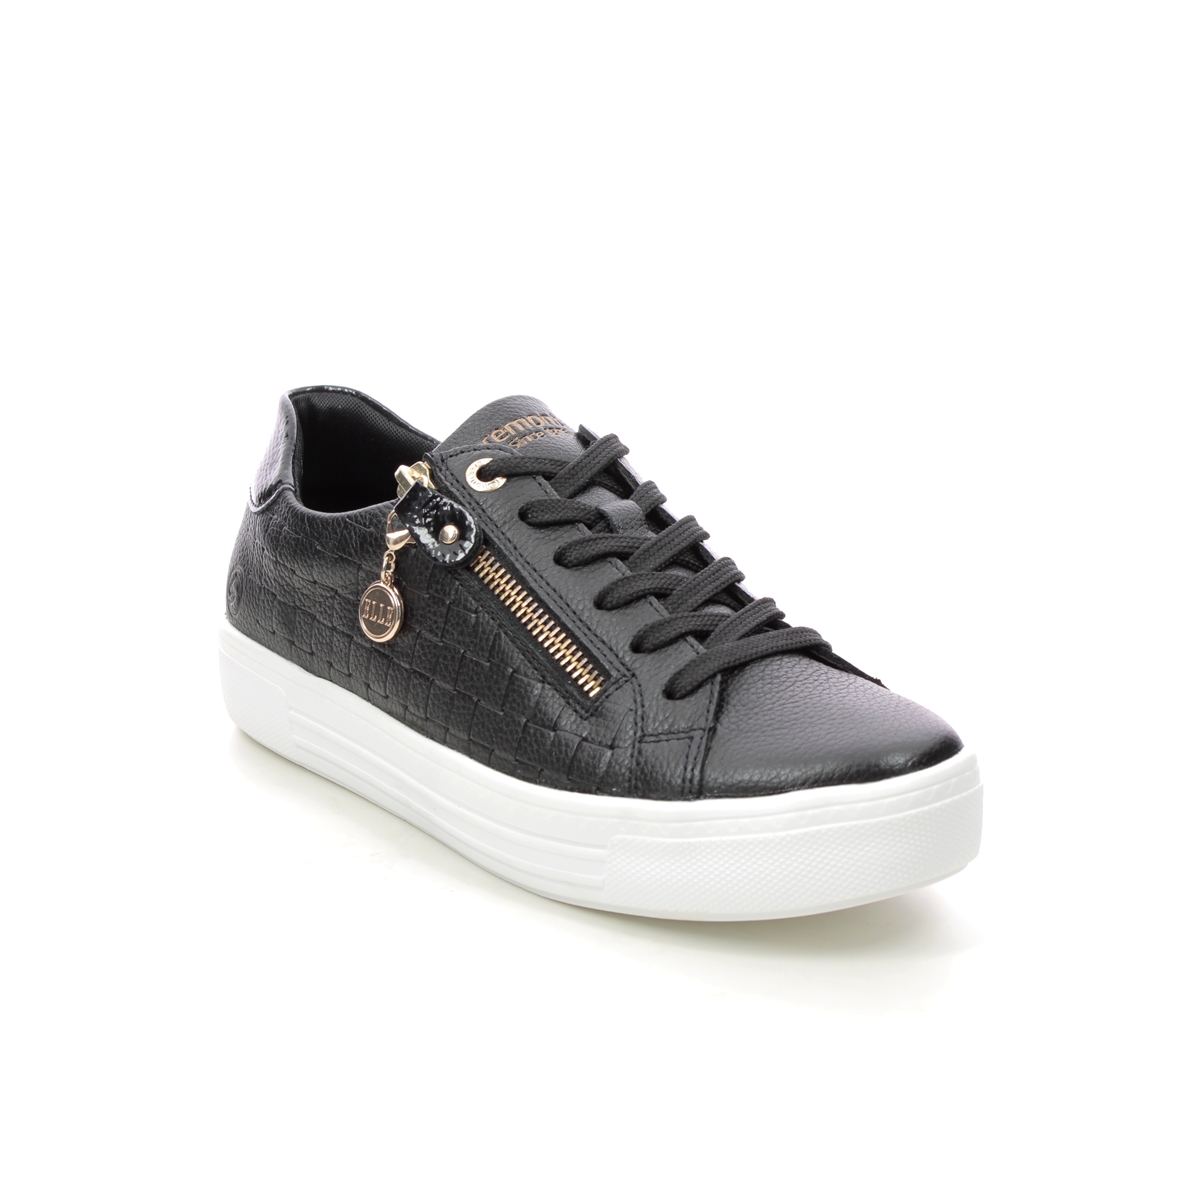 Remonte Altozip Elle Black Leather Womens Trainers D0916-00 In Size 38 In Plain Black Leather